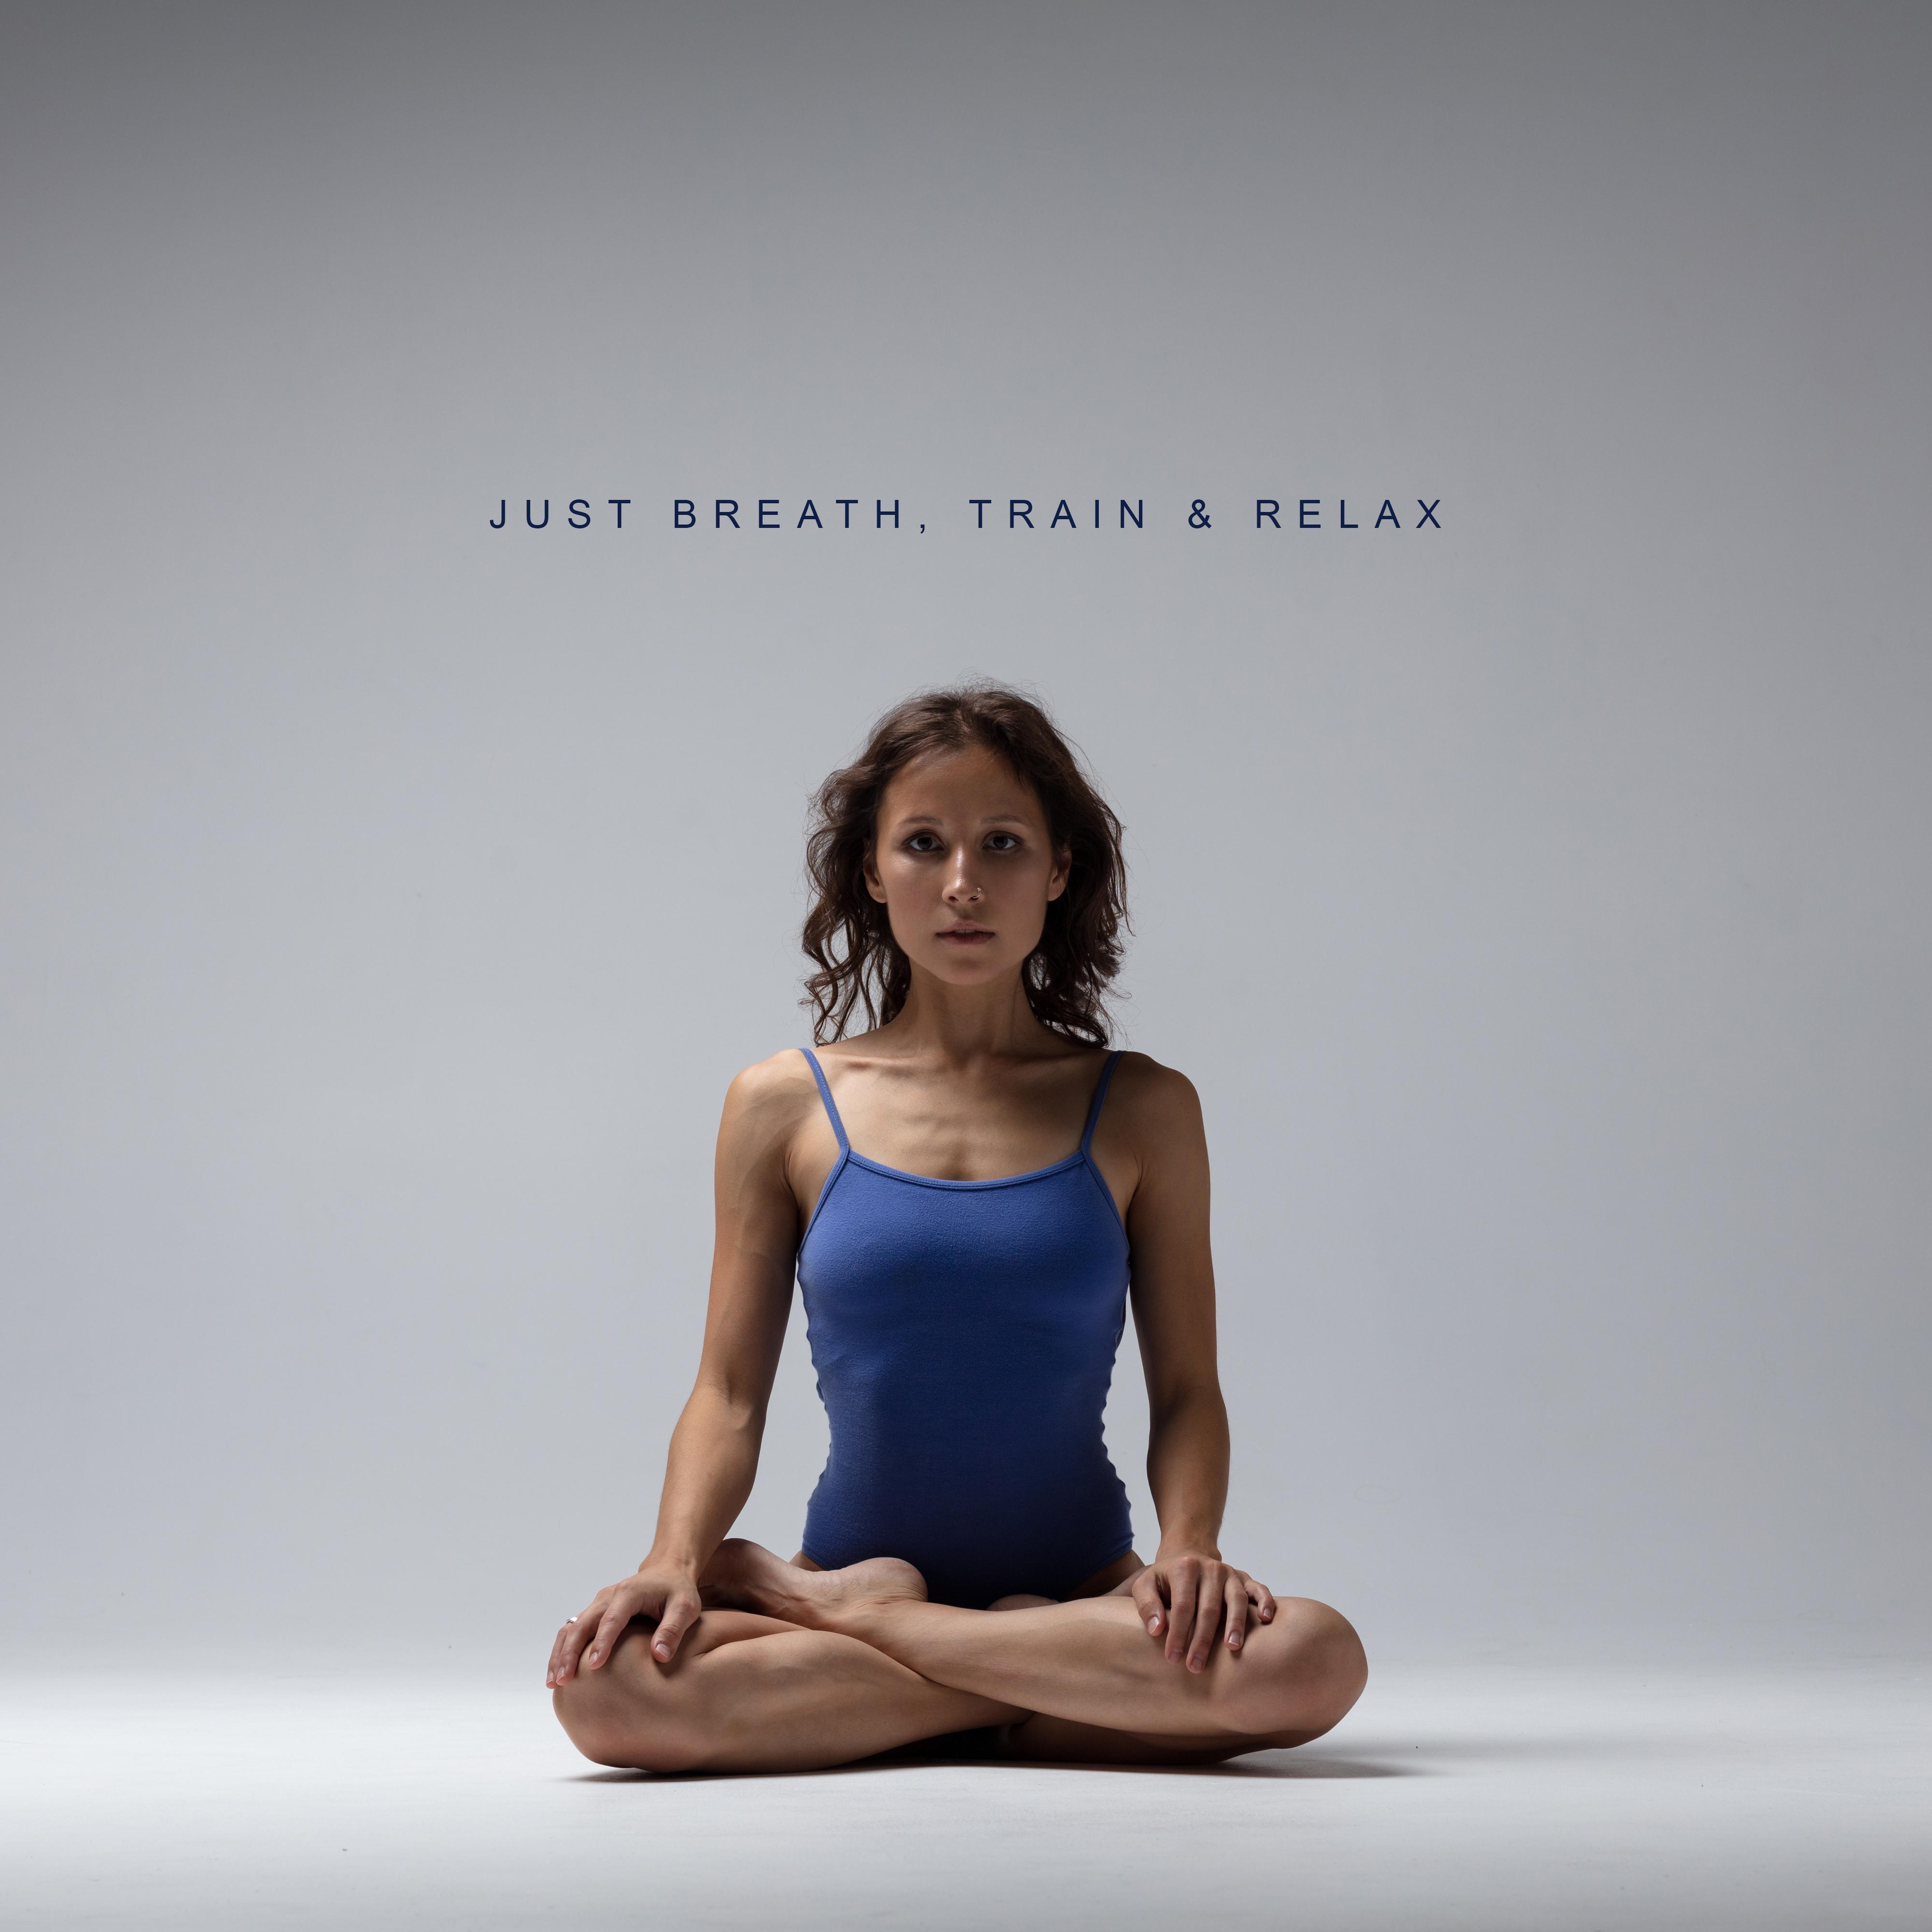 Just Breath, Train & Relax: New Age 2019 Music for Yoga Training & Relaxation, Fight with Bad Emotions, Improve Your Mood, Learn to Be Happy